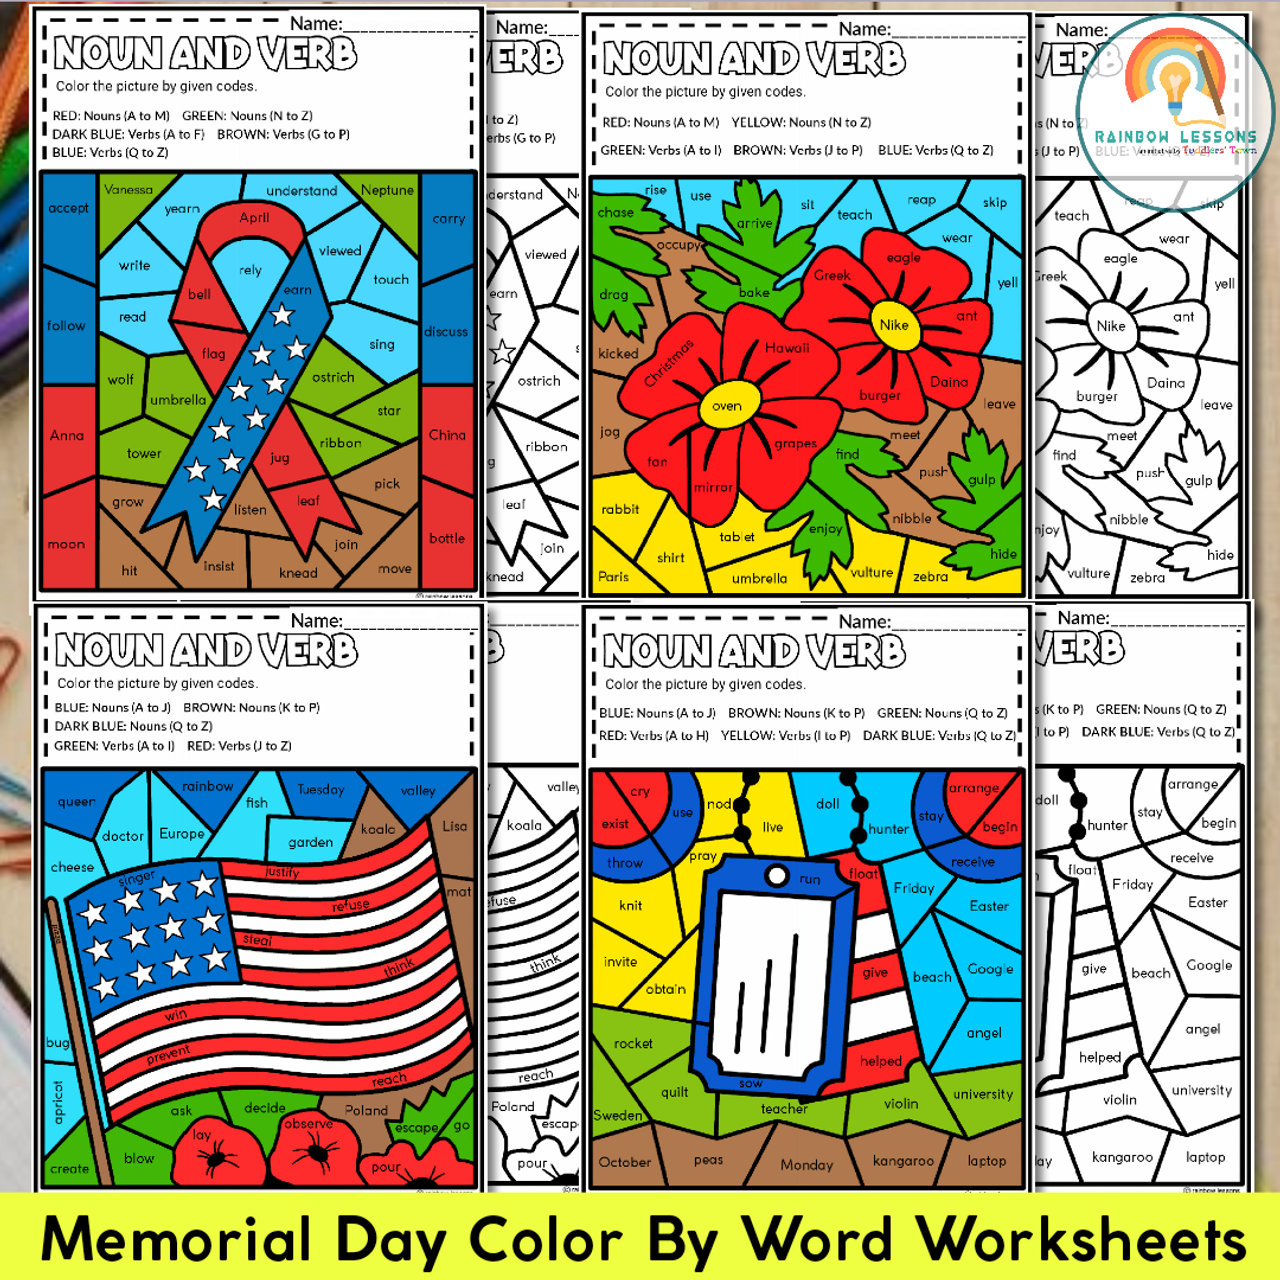 Memorial Day Color By Code | Memorial Day Coloring Pages | Nouns and Verbs Sort